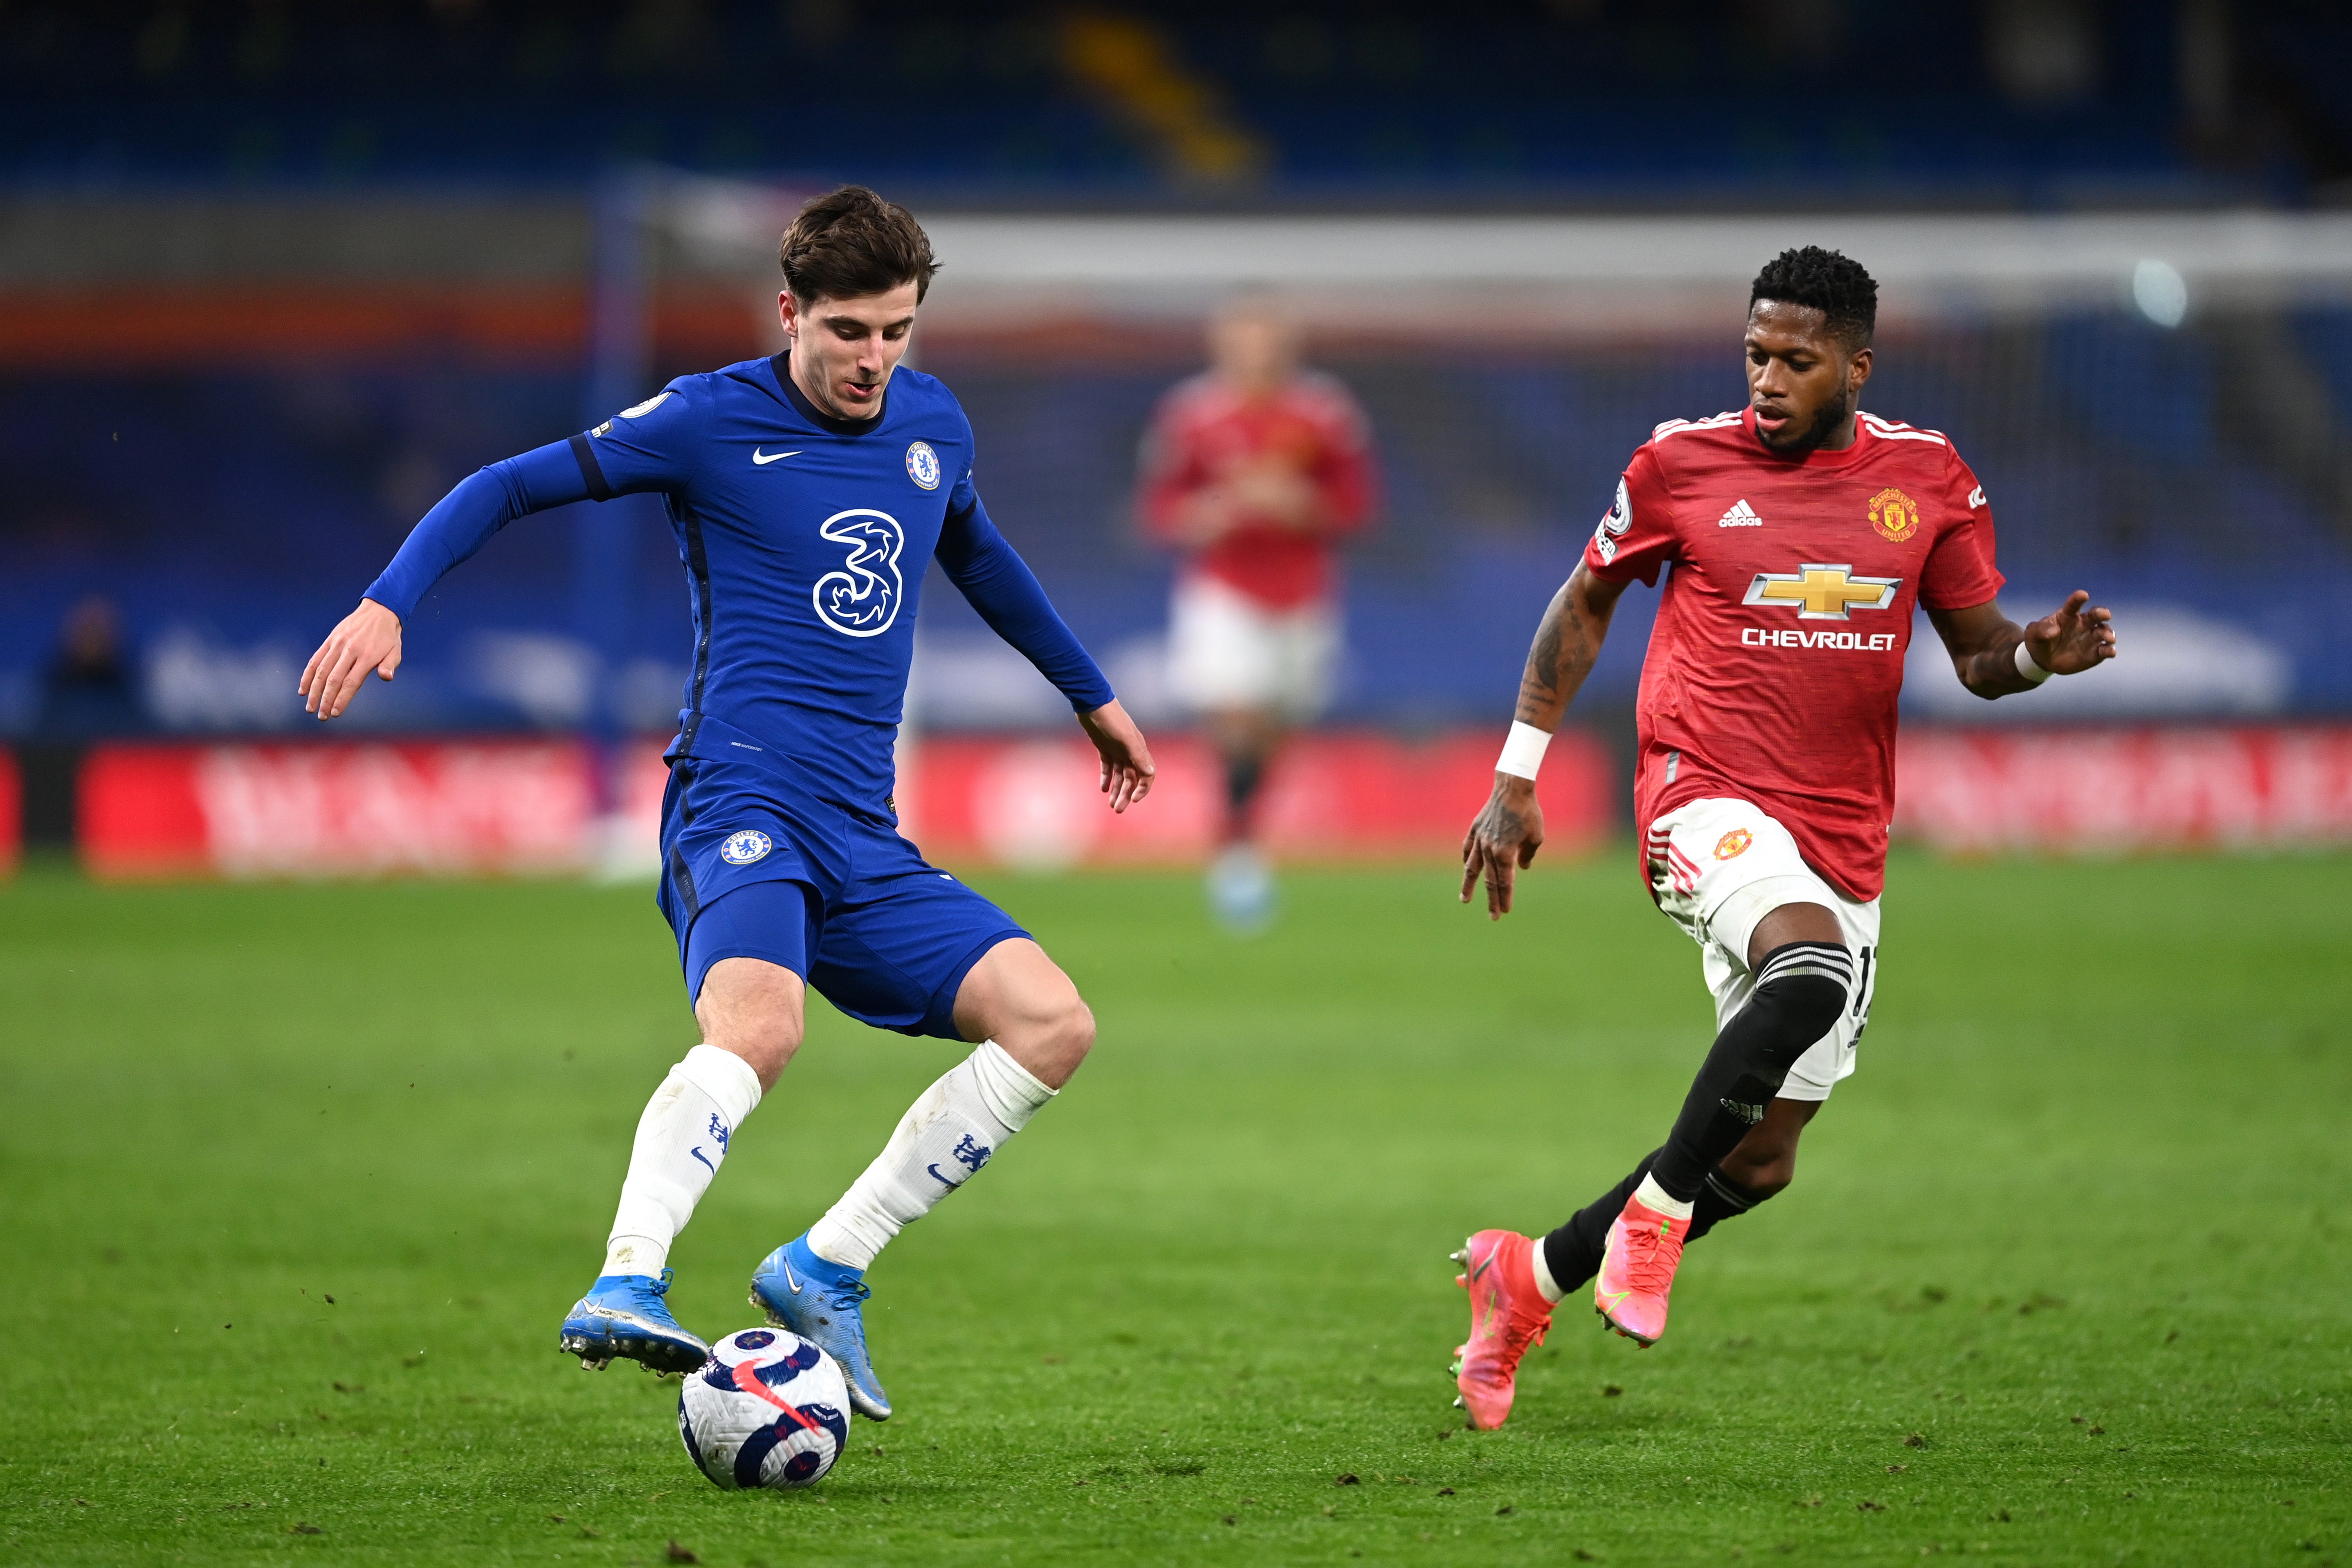 Mason Mount was Chelsea’s standout player